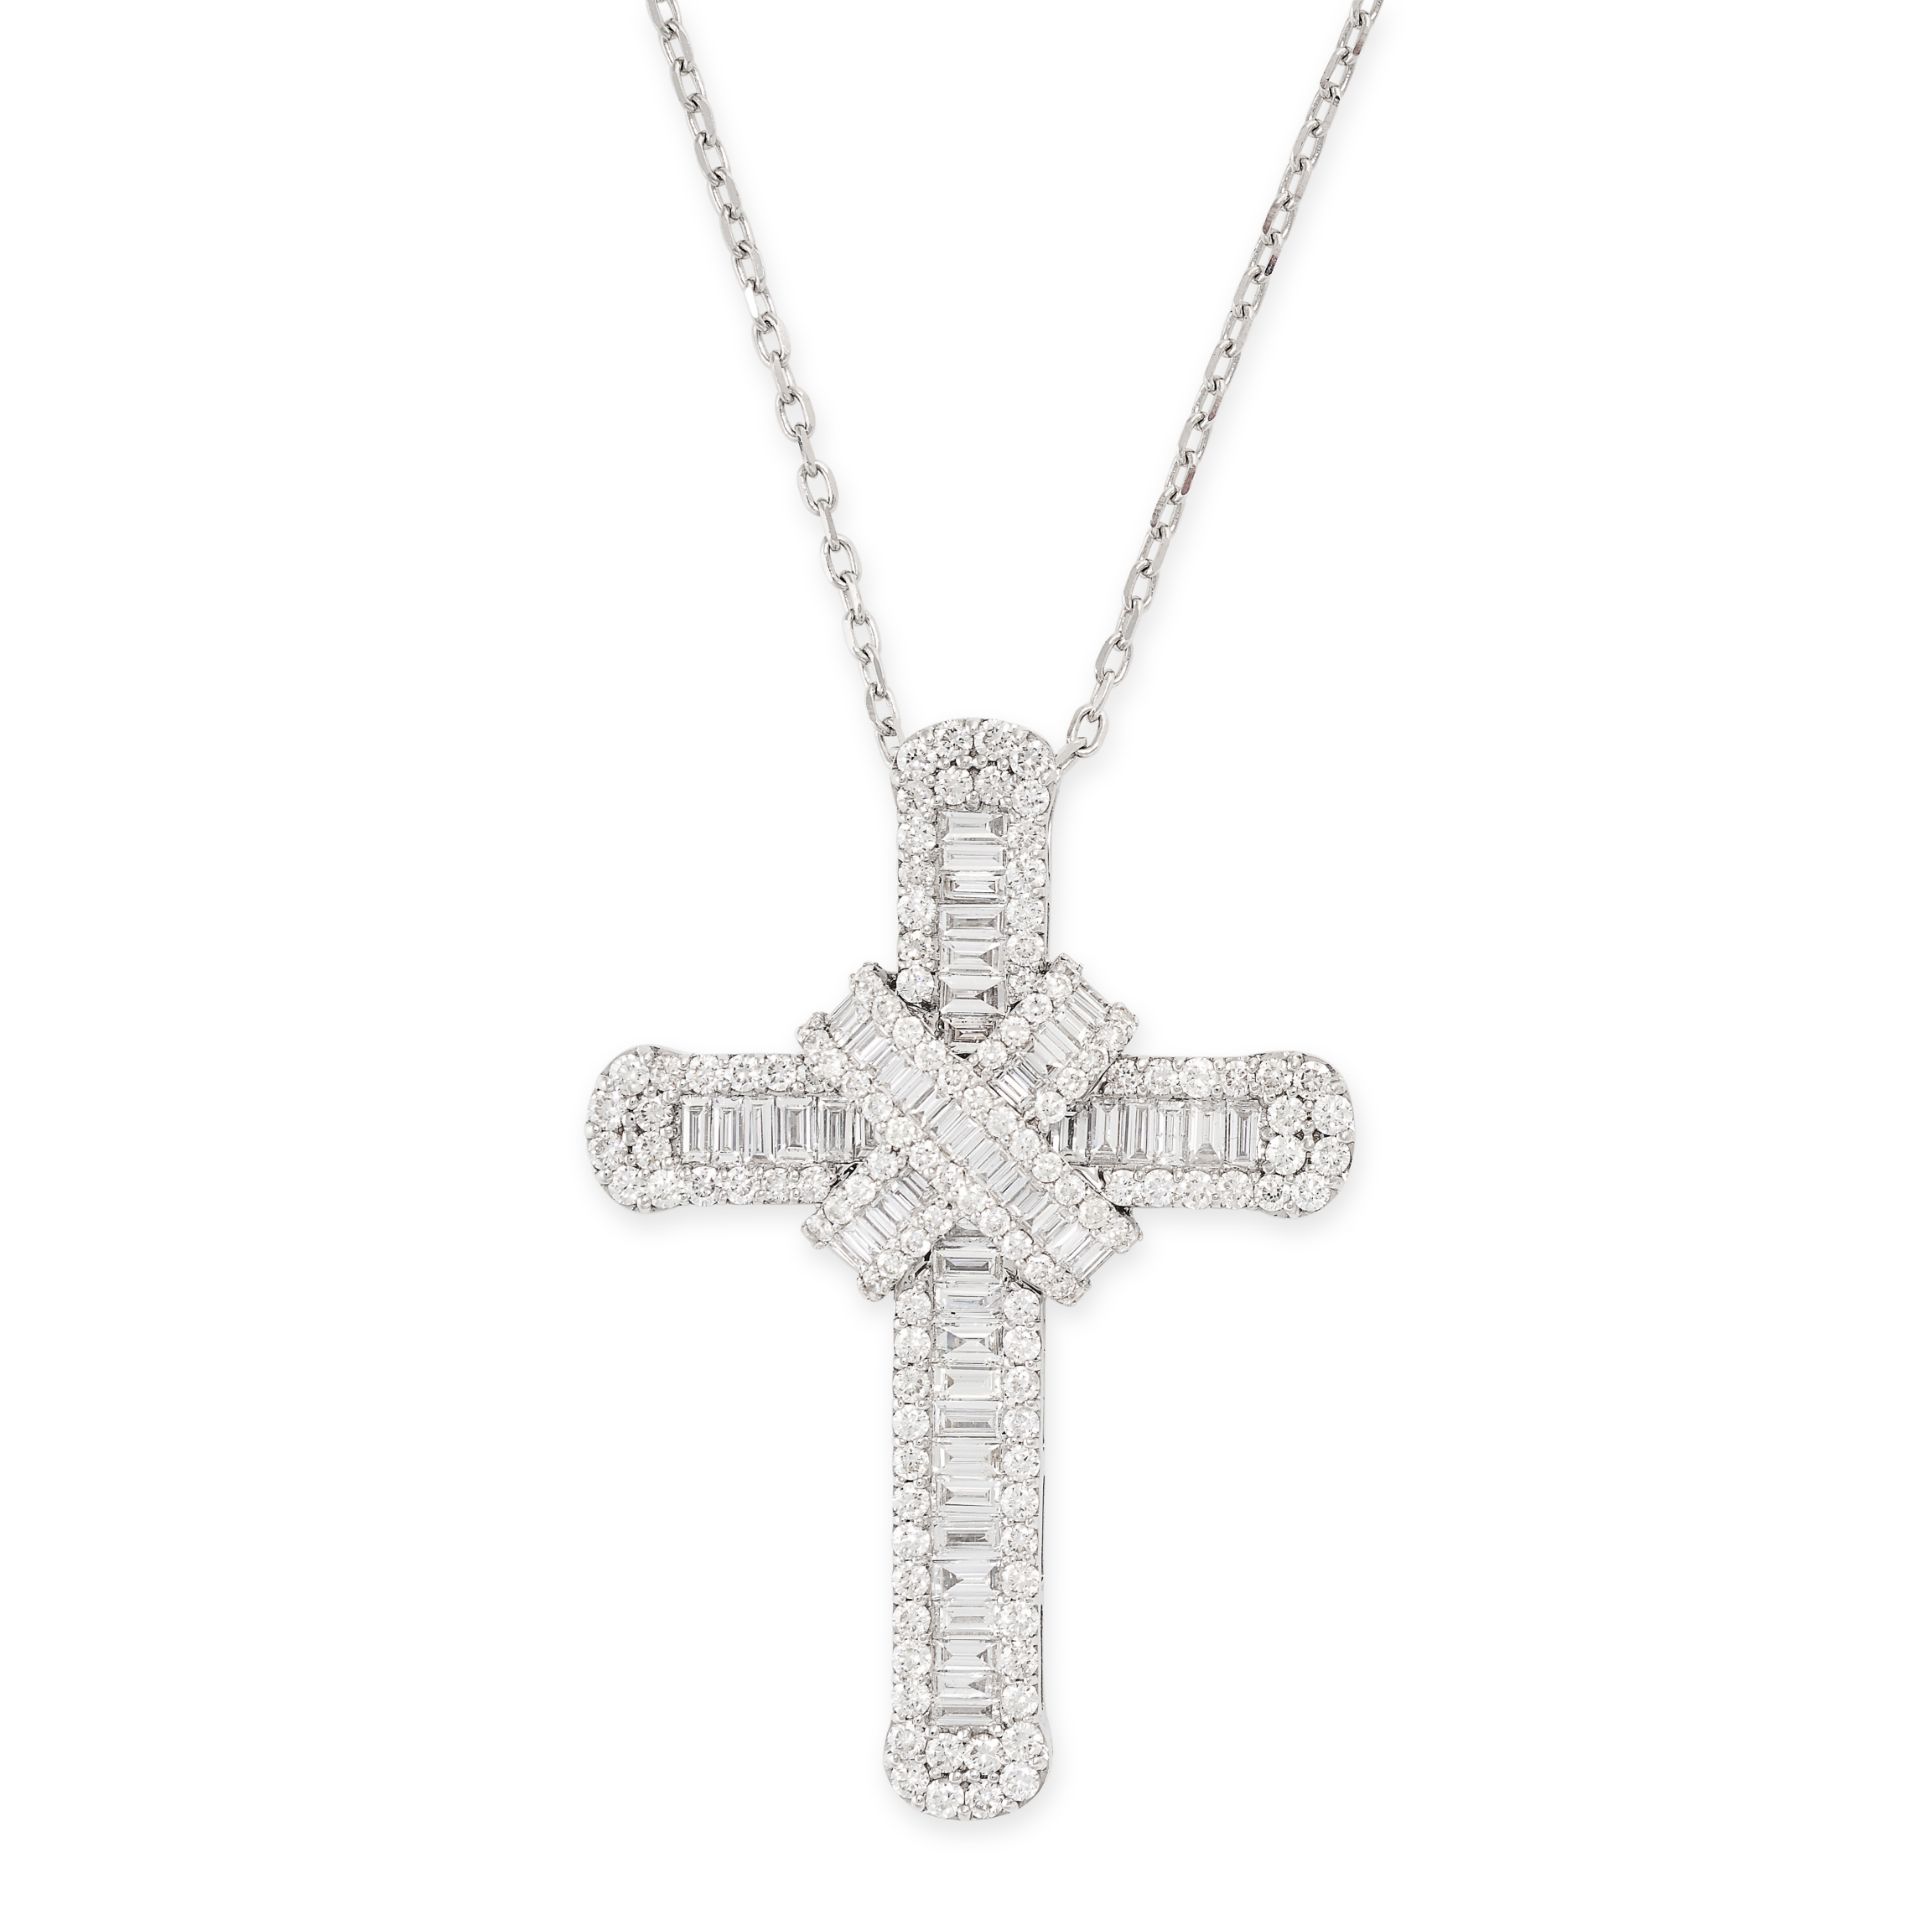 A DIAMOND CROSS PENDANT AND CHAIN set throughout with baguette and round brilliant cut diamonds, all